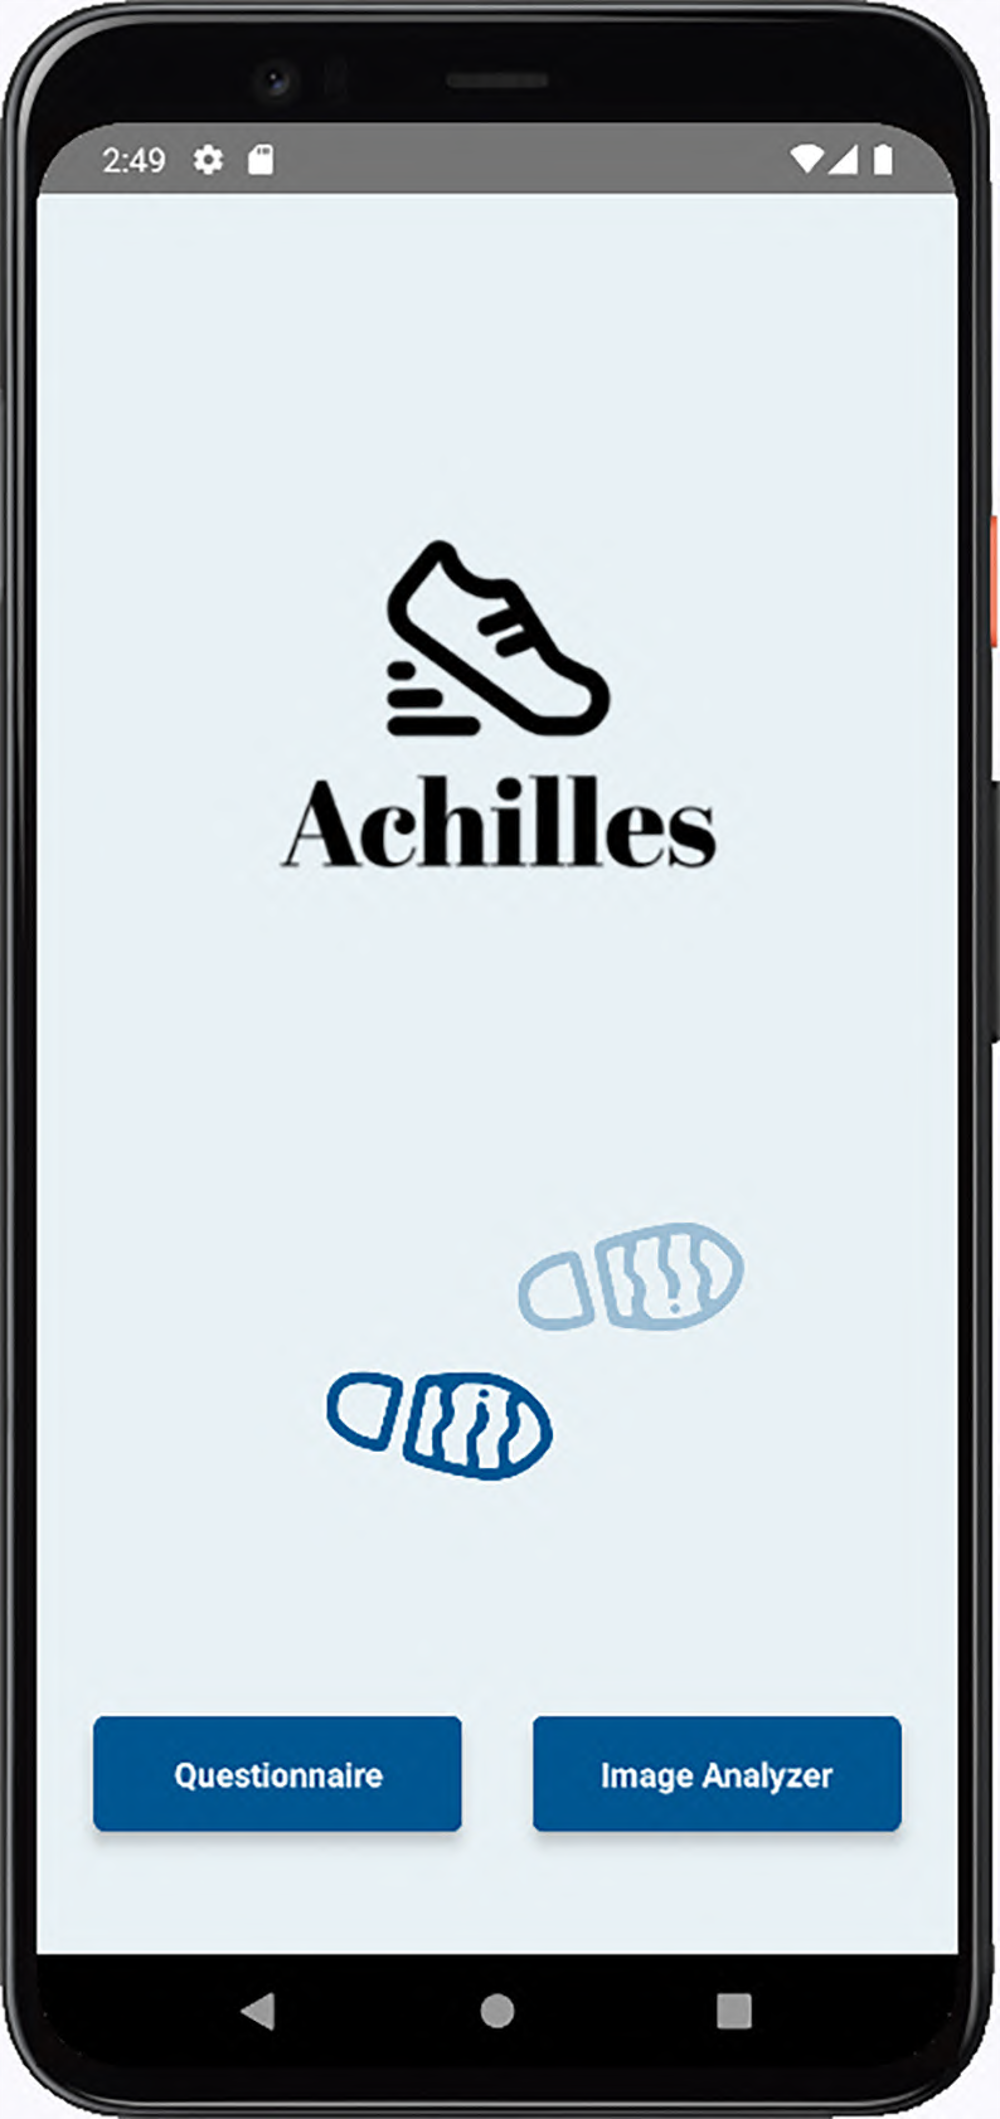 A mock up of a cell phone showing the home screen of an app called Achilles